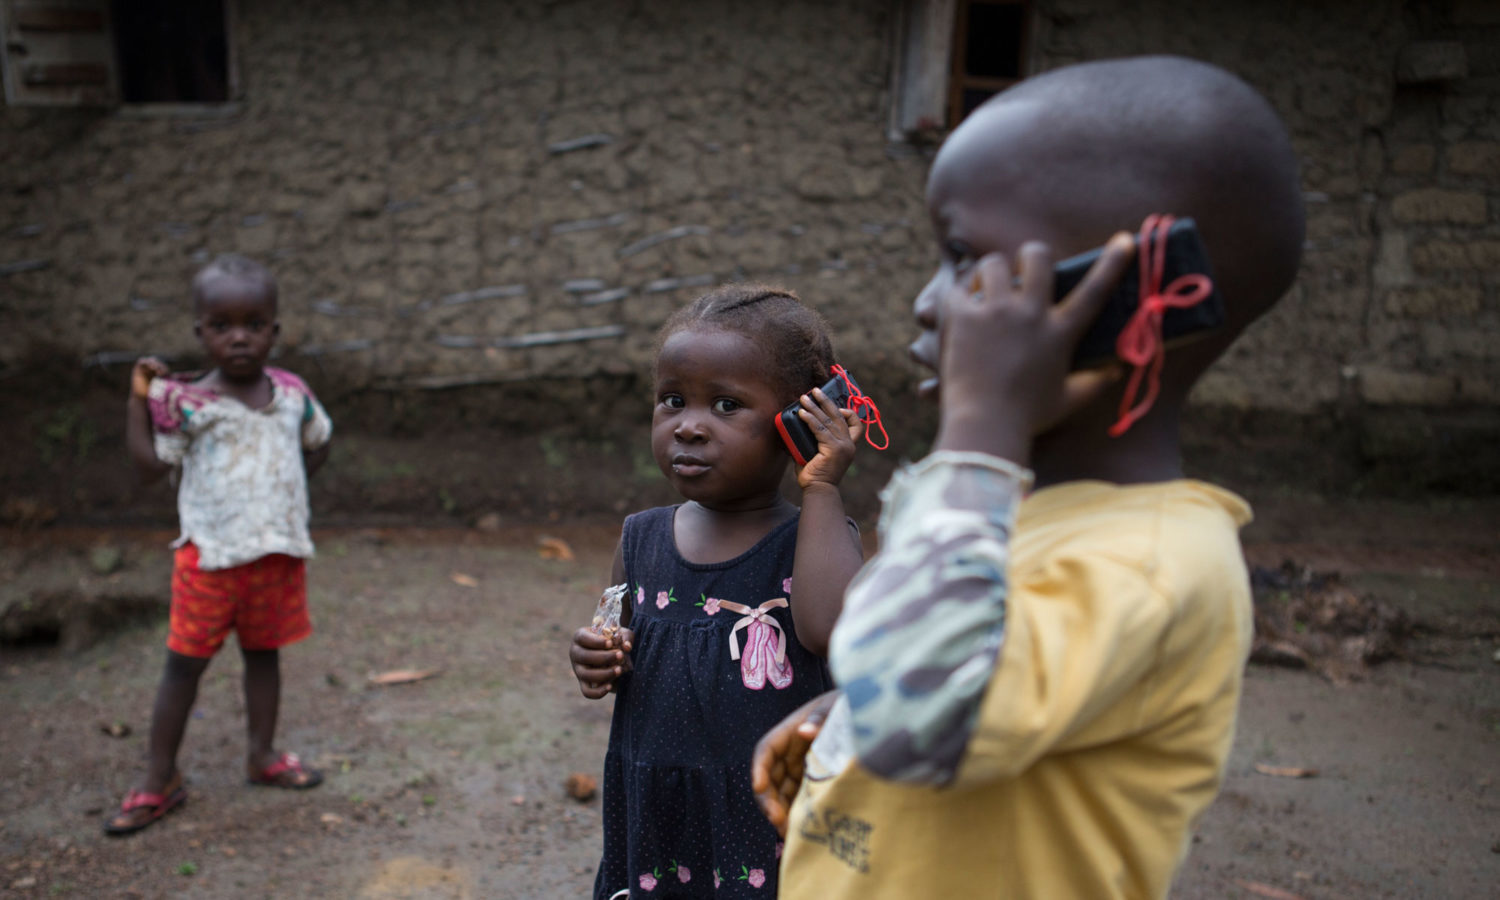 On 25 September, [NAMES CHANGED] (foreground, left-right) siblings Awa, 3, and Amadou, 4, pretend to talk on toy mobile telephones, at home in a village on the outskirts of the city of Kenema in Eastern Province. Many of the people in the village are affected by Ebola. Olematu and Ibrahim are being cared for by their 15-year-old sister, Betty, with help from a neighbour, following the death of their mother from Ebola one month ago. Betty is a survivor of the virus. An estimated 1,131 children in Sierra Leone are affected by Ebola virus disease. UNICEF/UNI172461/Bindra